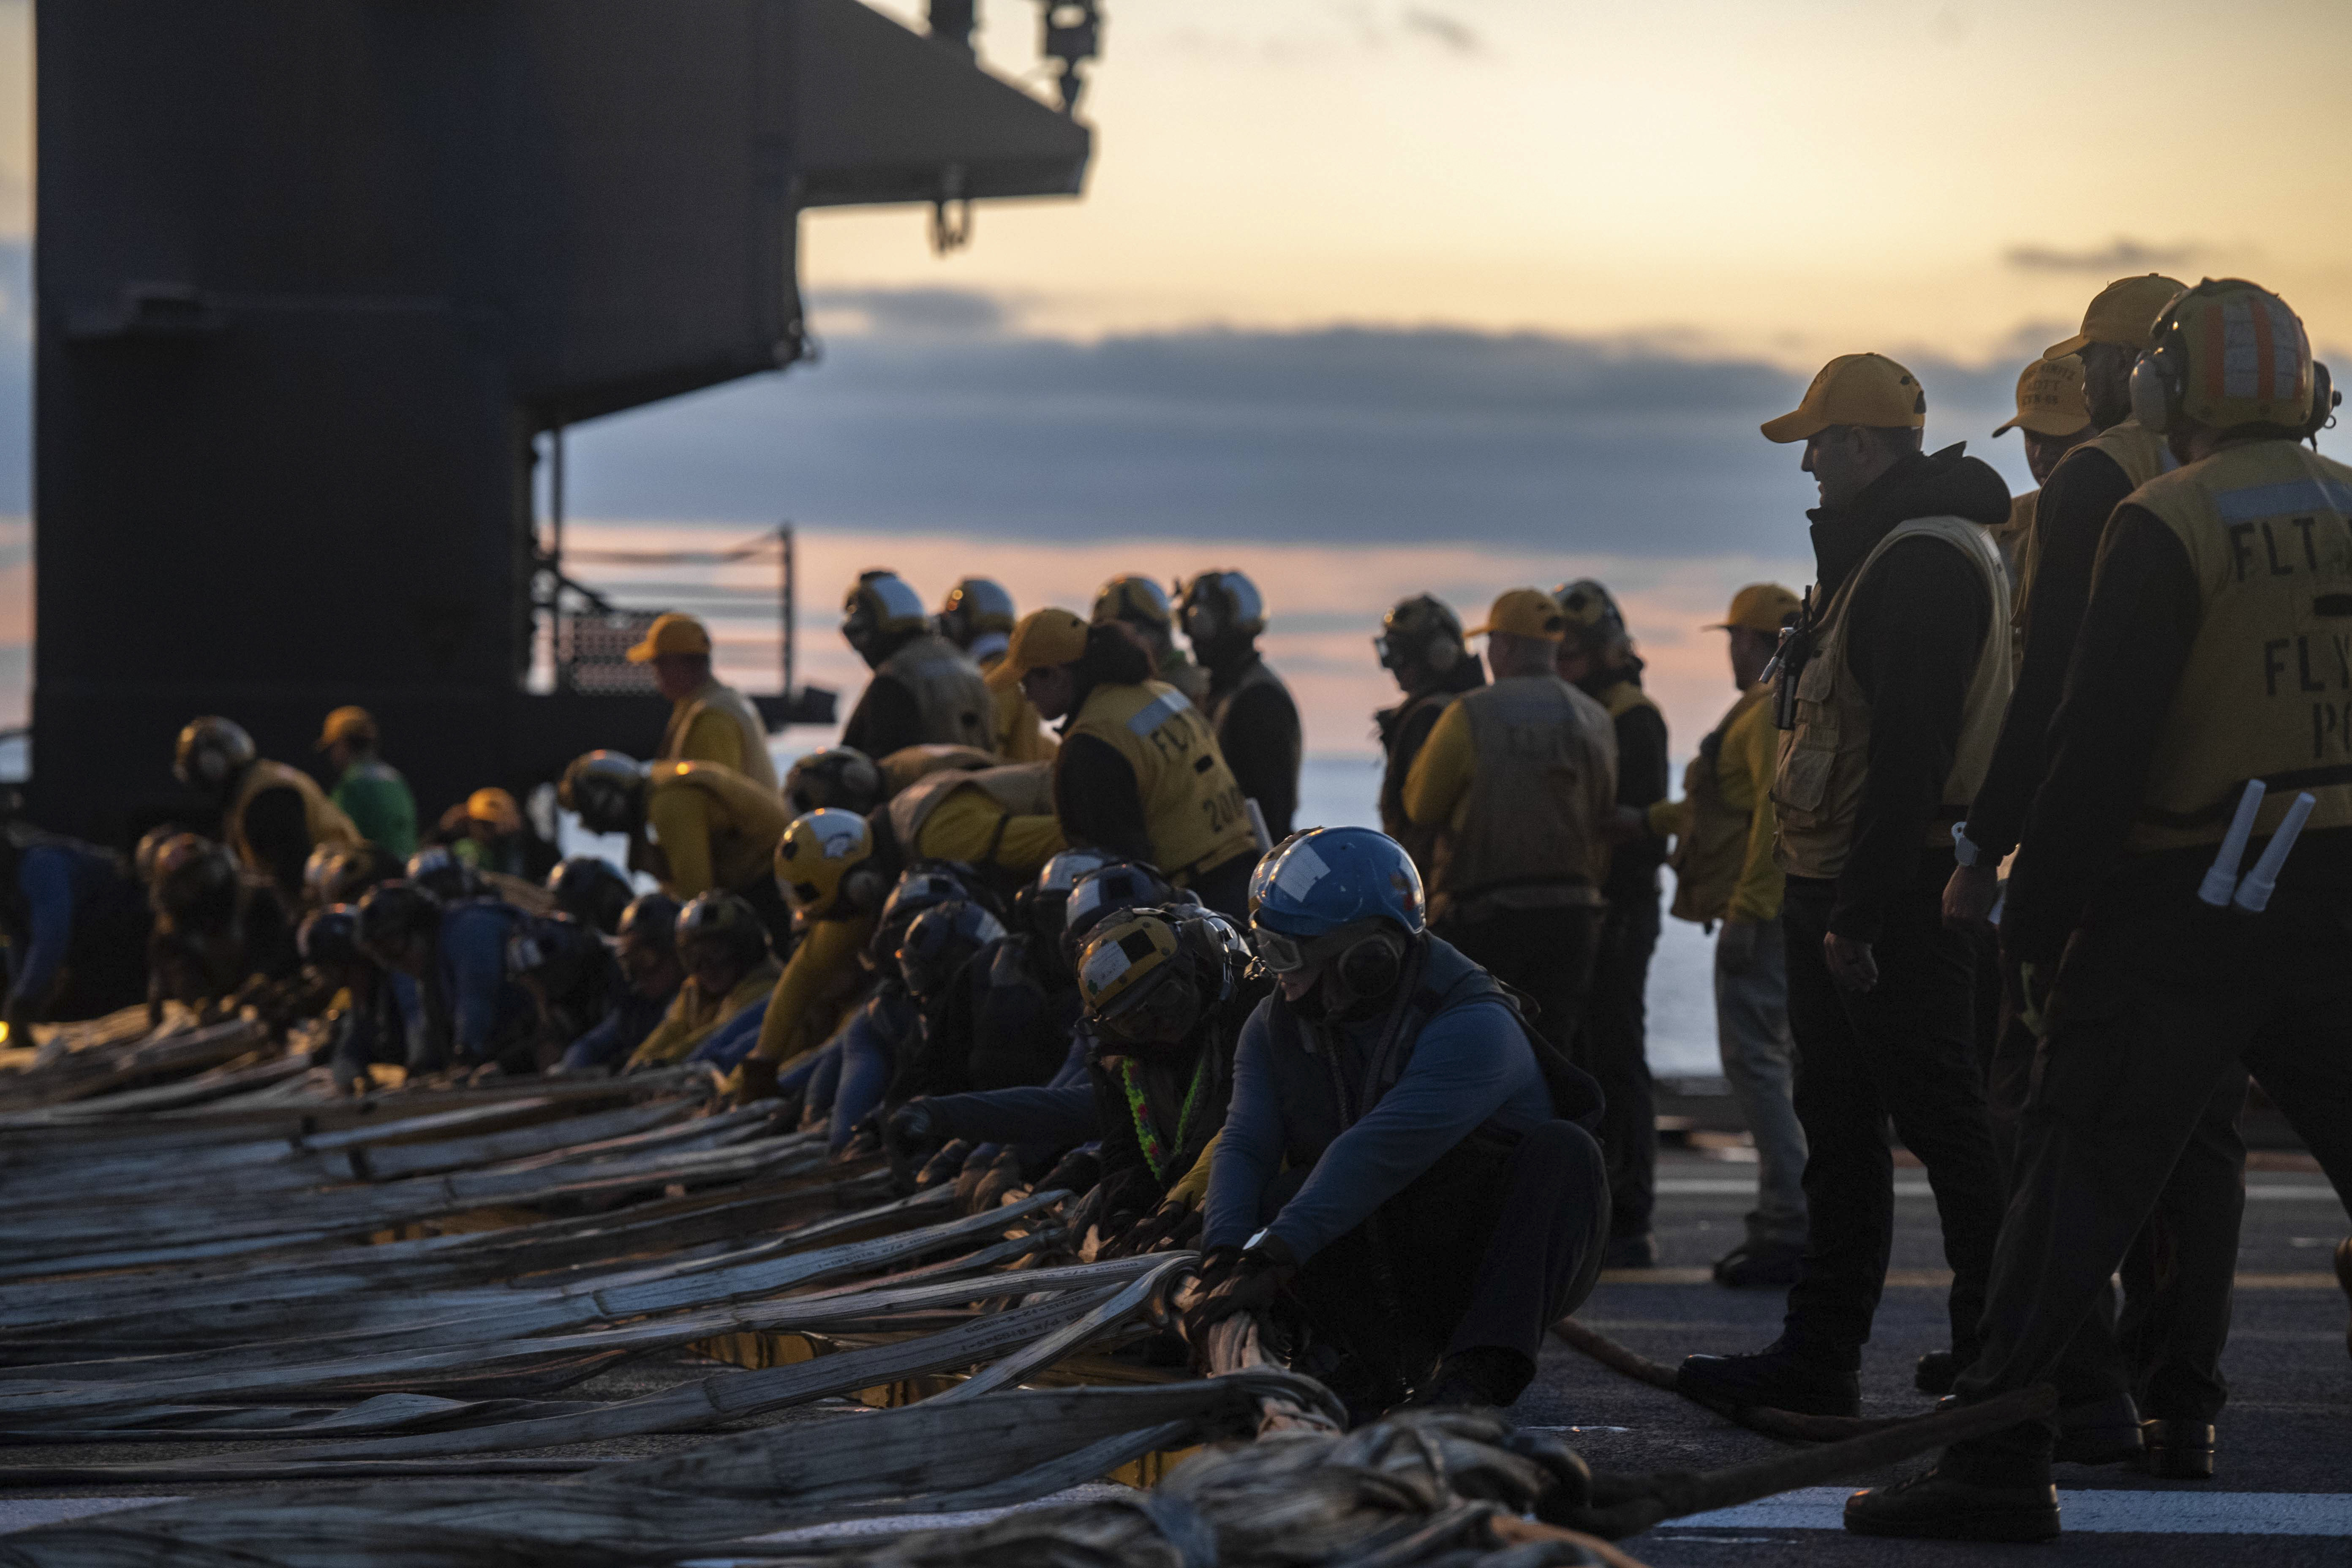 Sailors rig the barricade in a flight deck drill on aircraft carrier USS Nimitz (CVN 68). Nimitz is currently underway conducting routine operations.